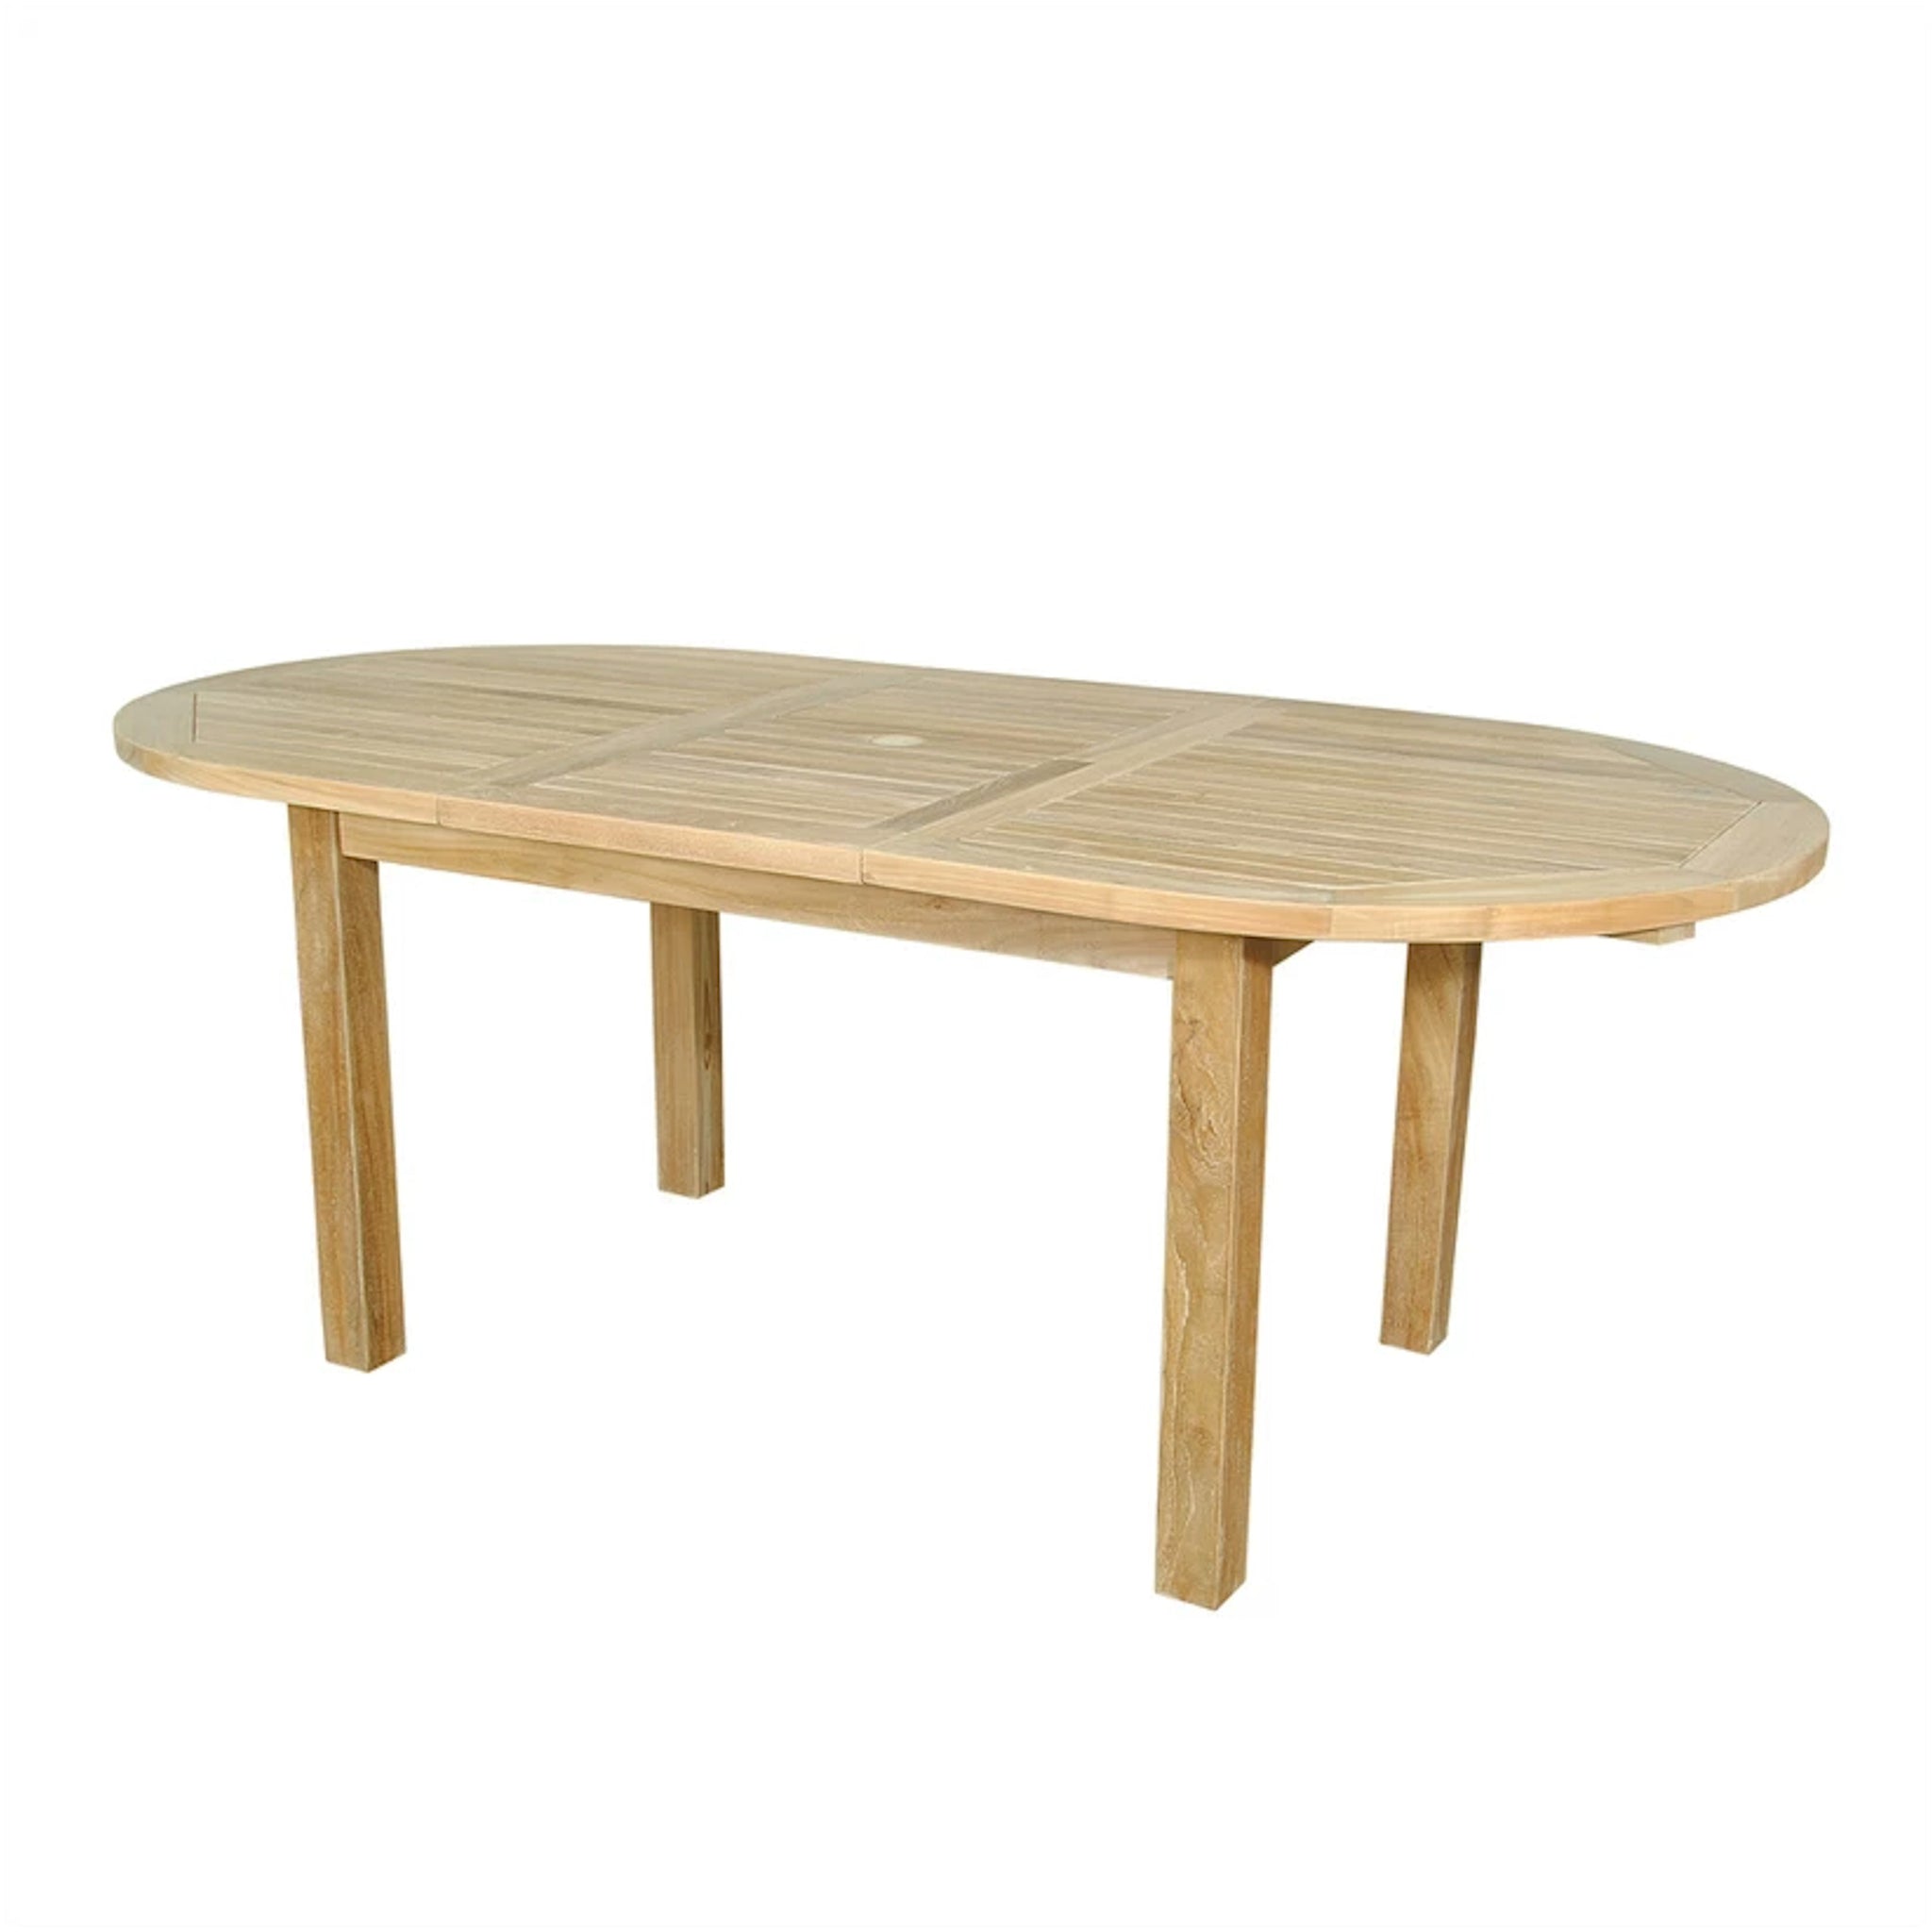 Anderson Teak Bahama 78" Oval Extension Table TBX-079V